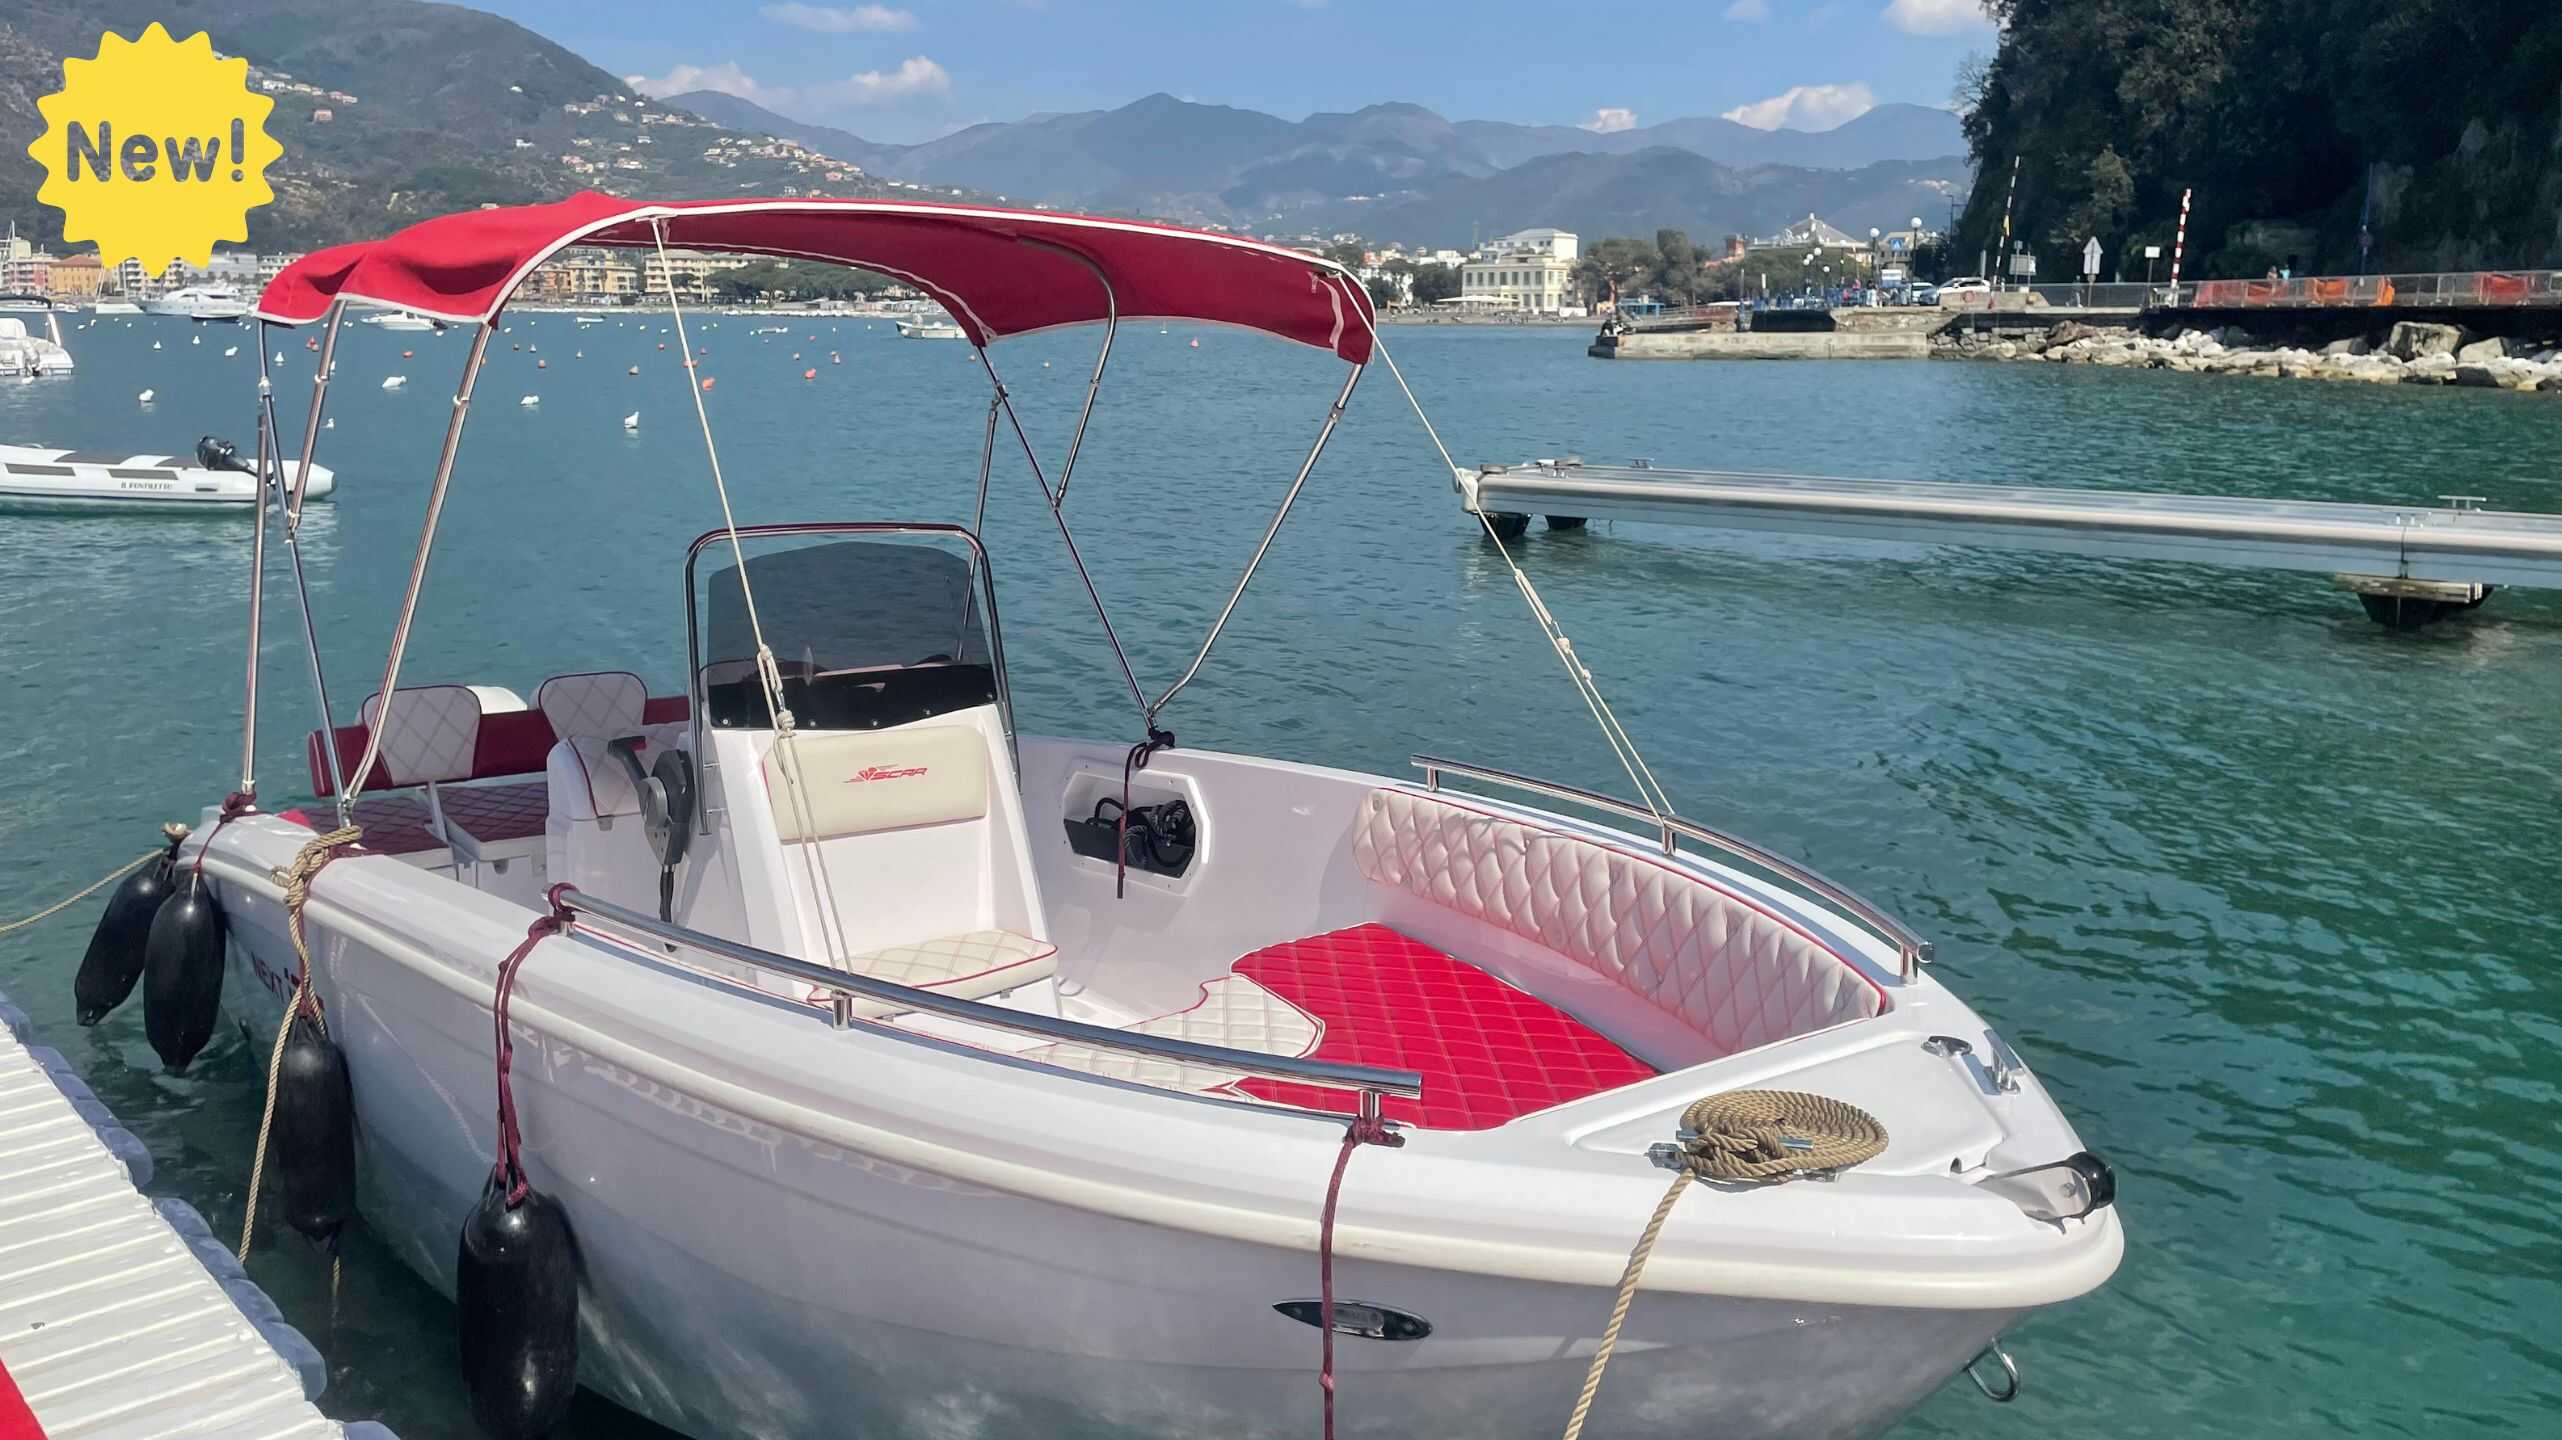 Next 195 40hp without a boat license 6mt (Max: 8 People)